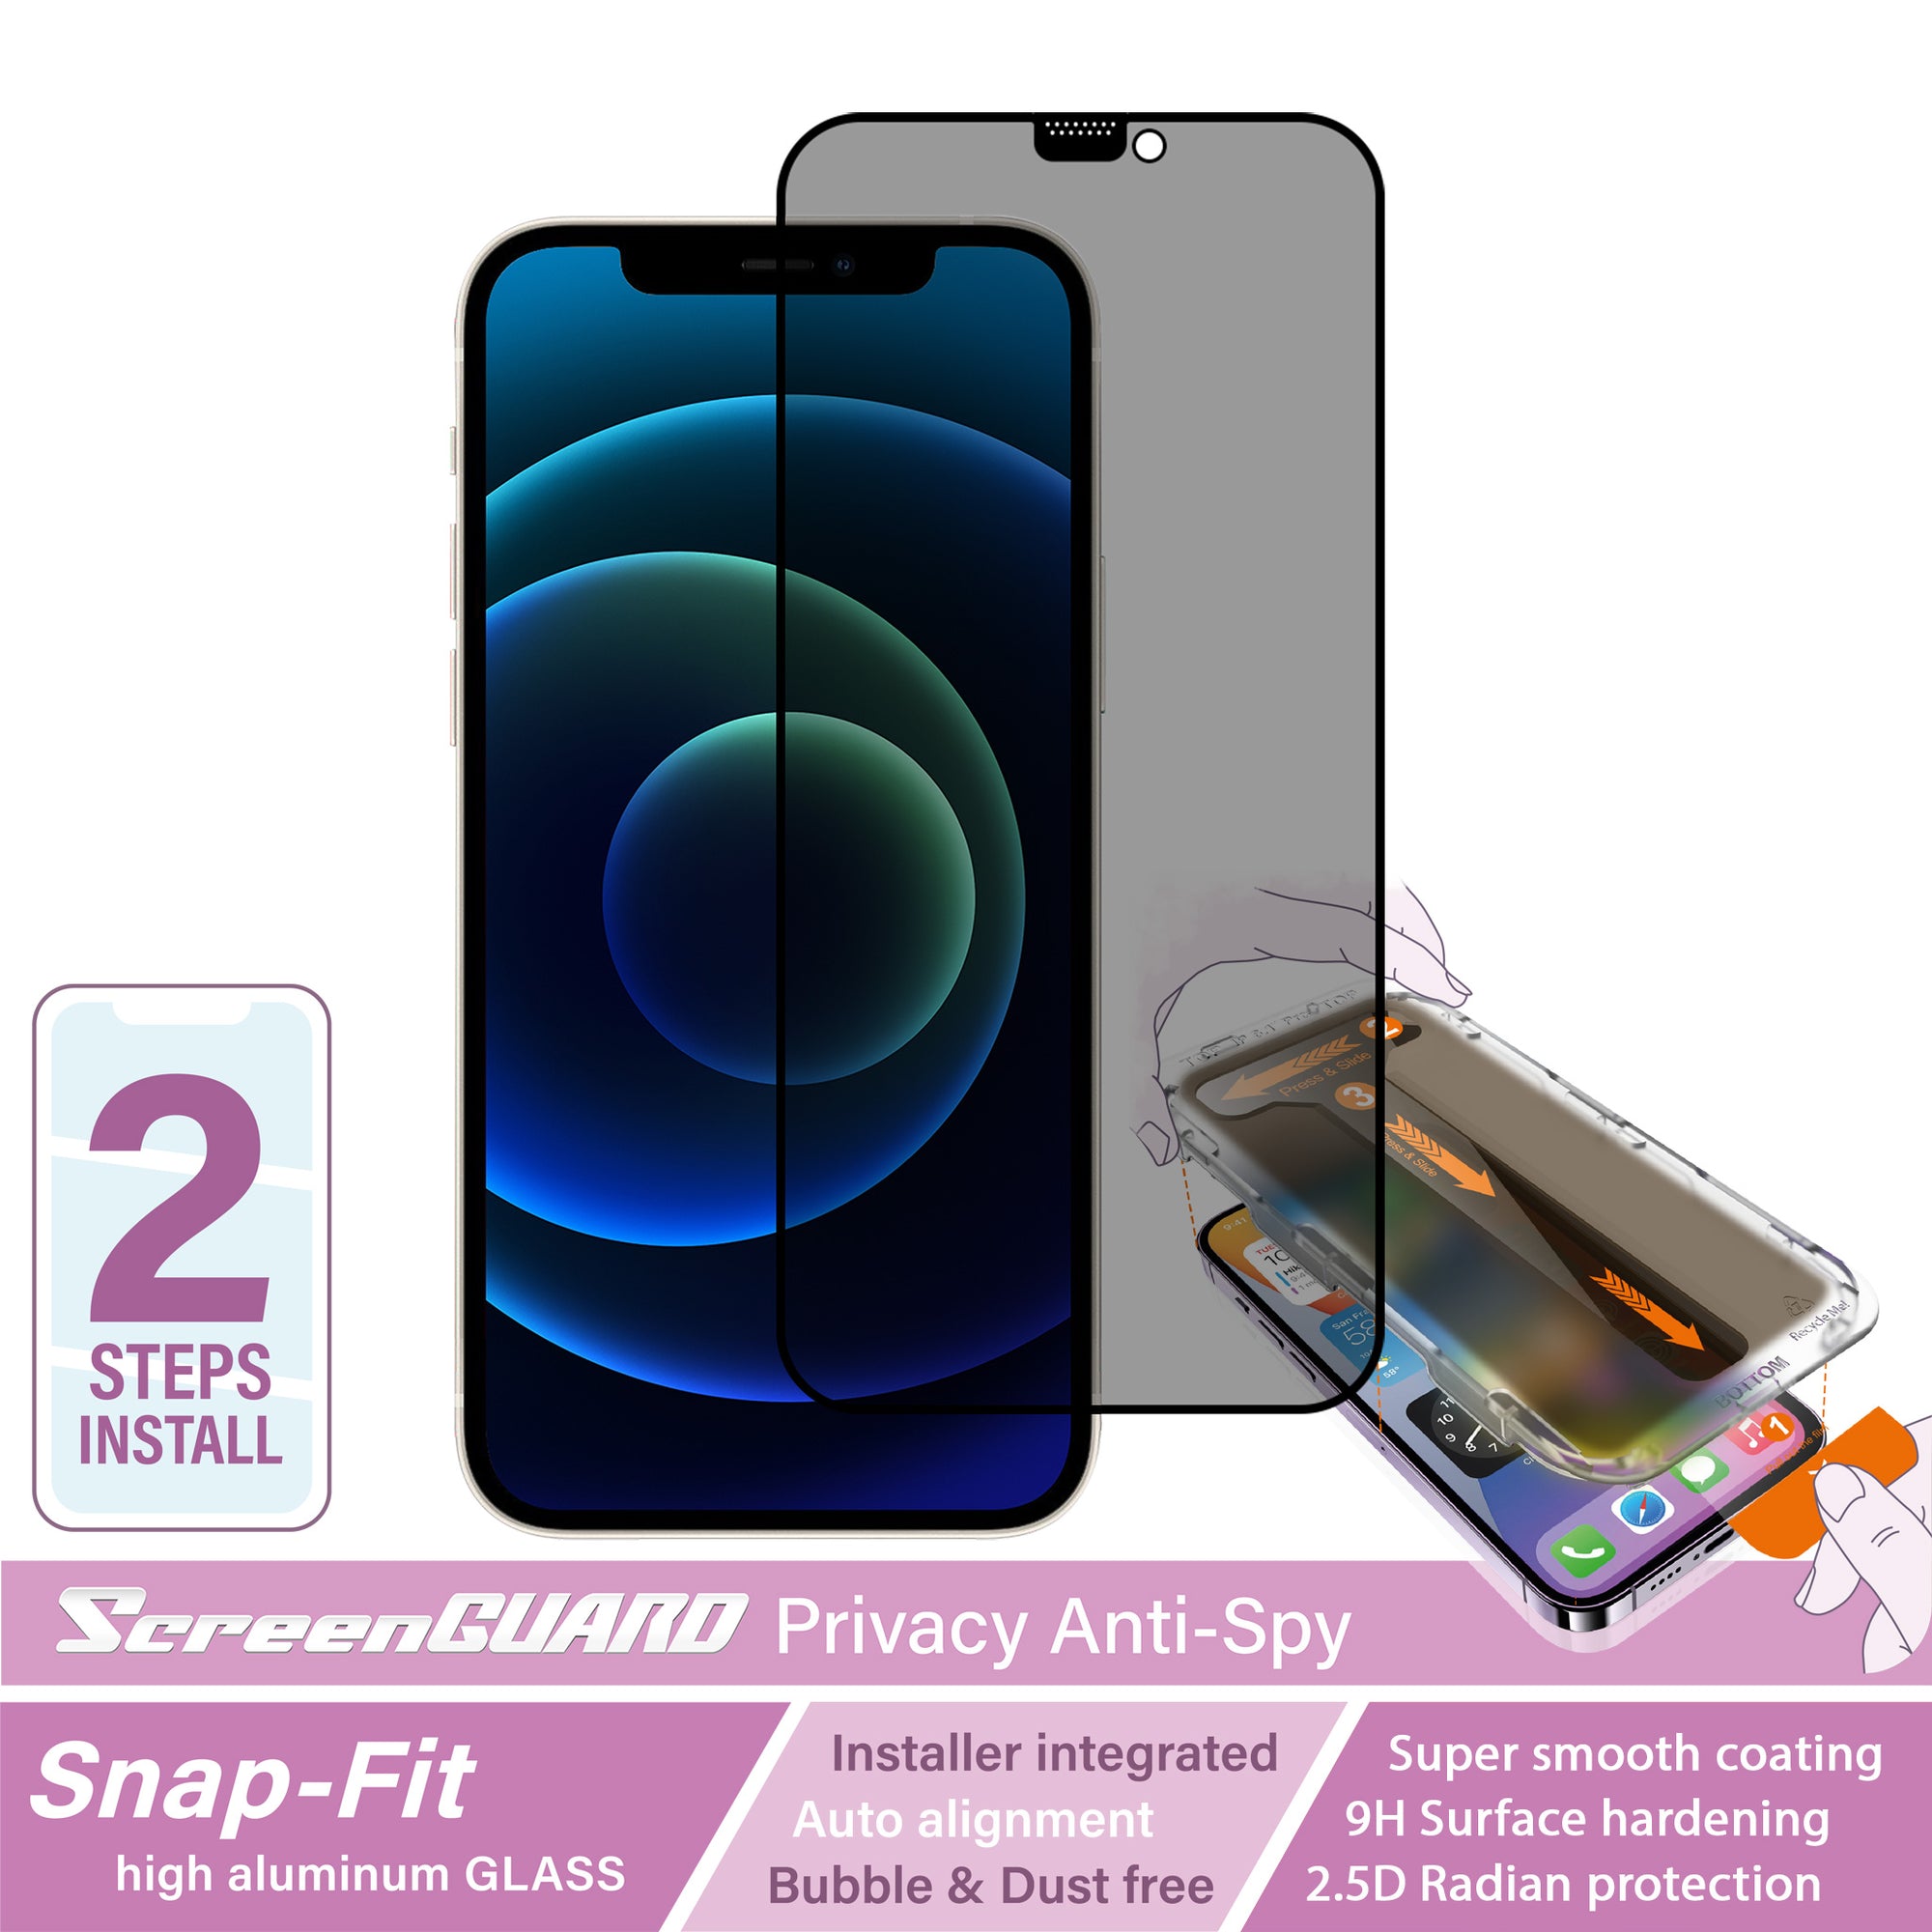 iPhone 12 & 12 Pro SnapFit High Aluminum Glass Privacy Screen Protector